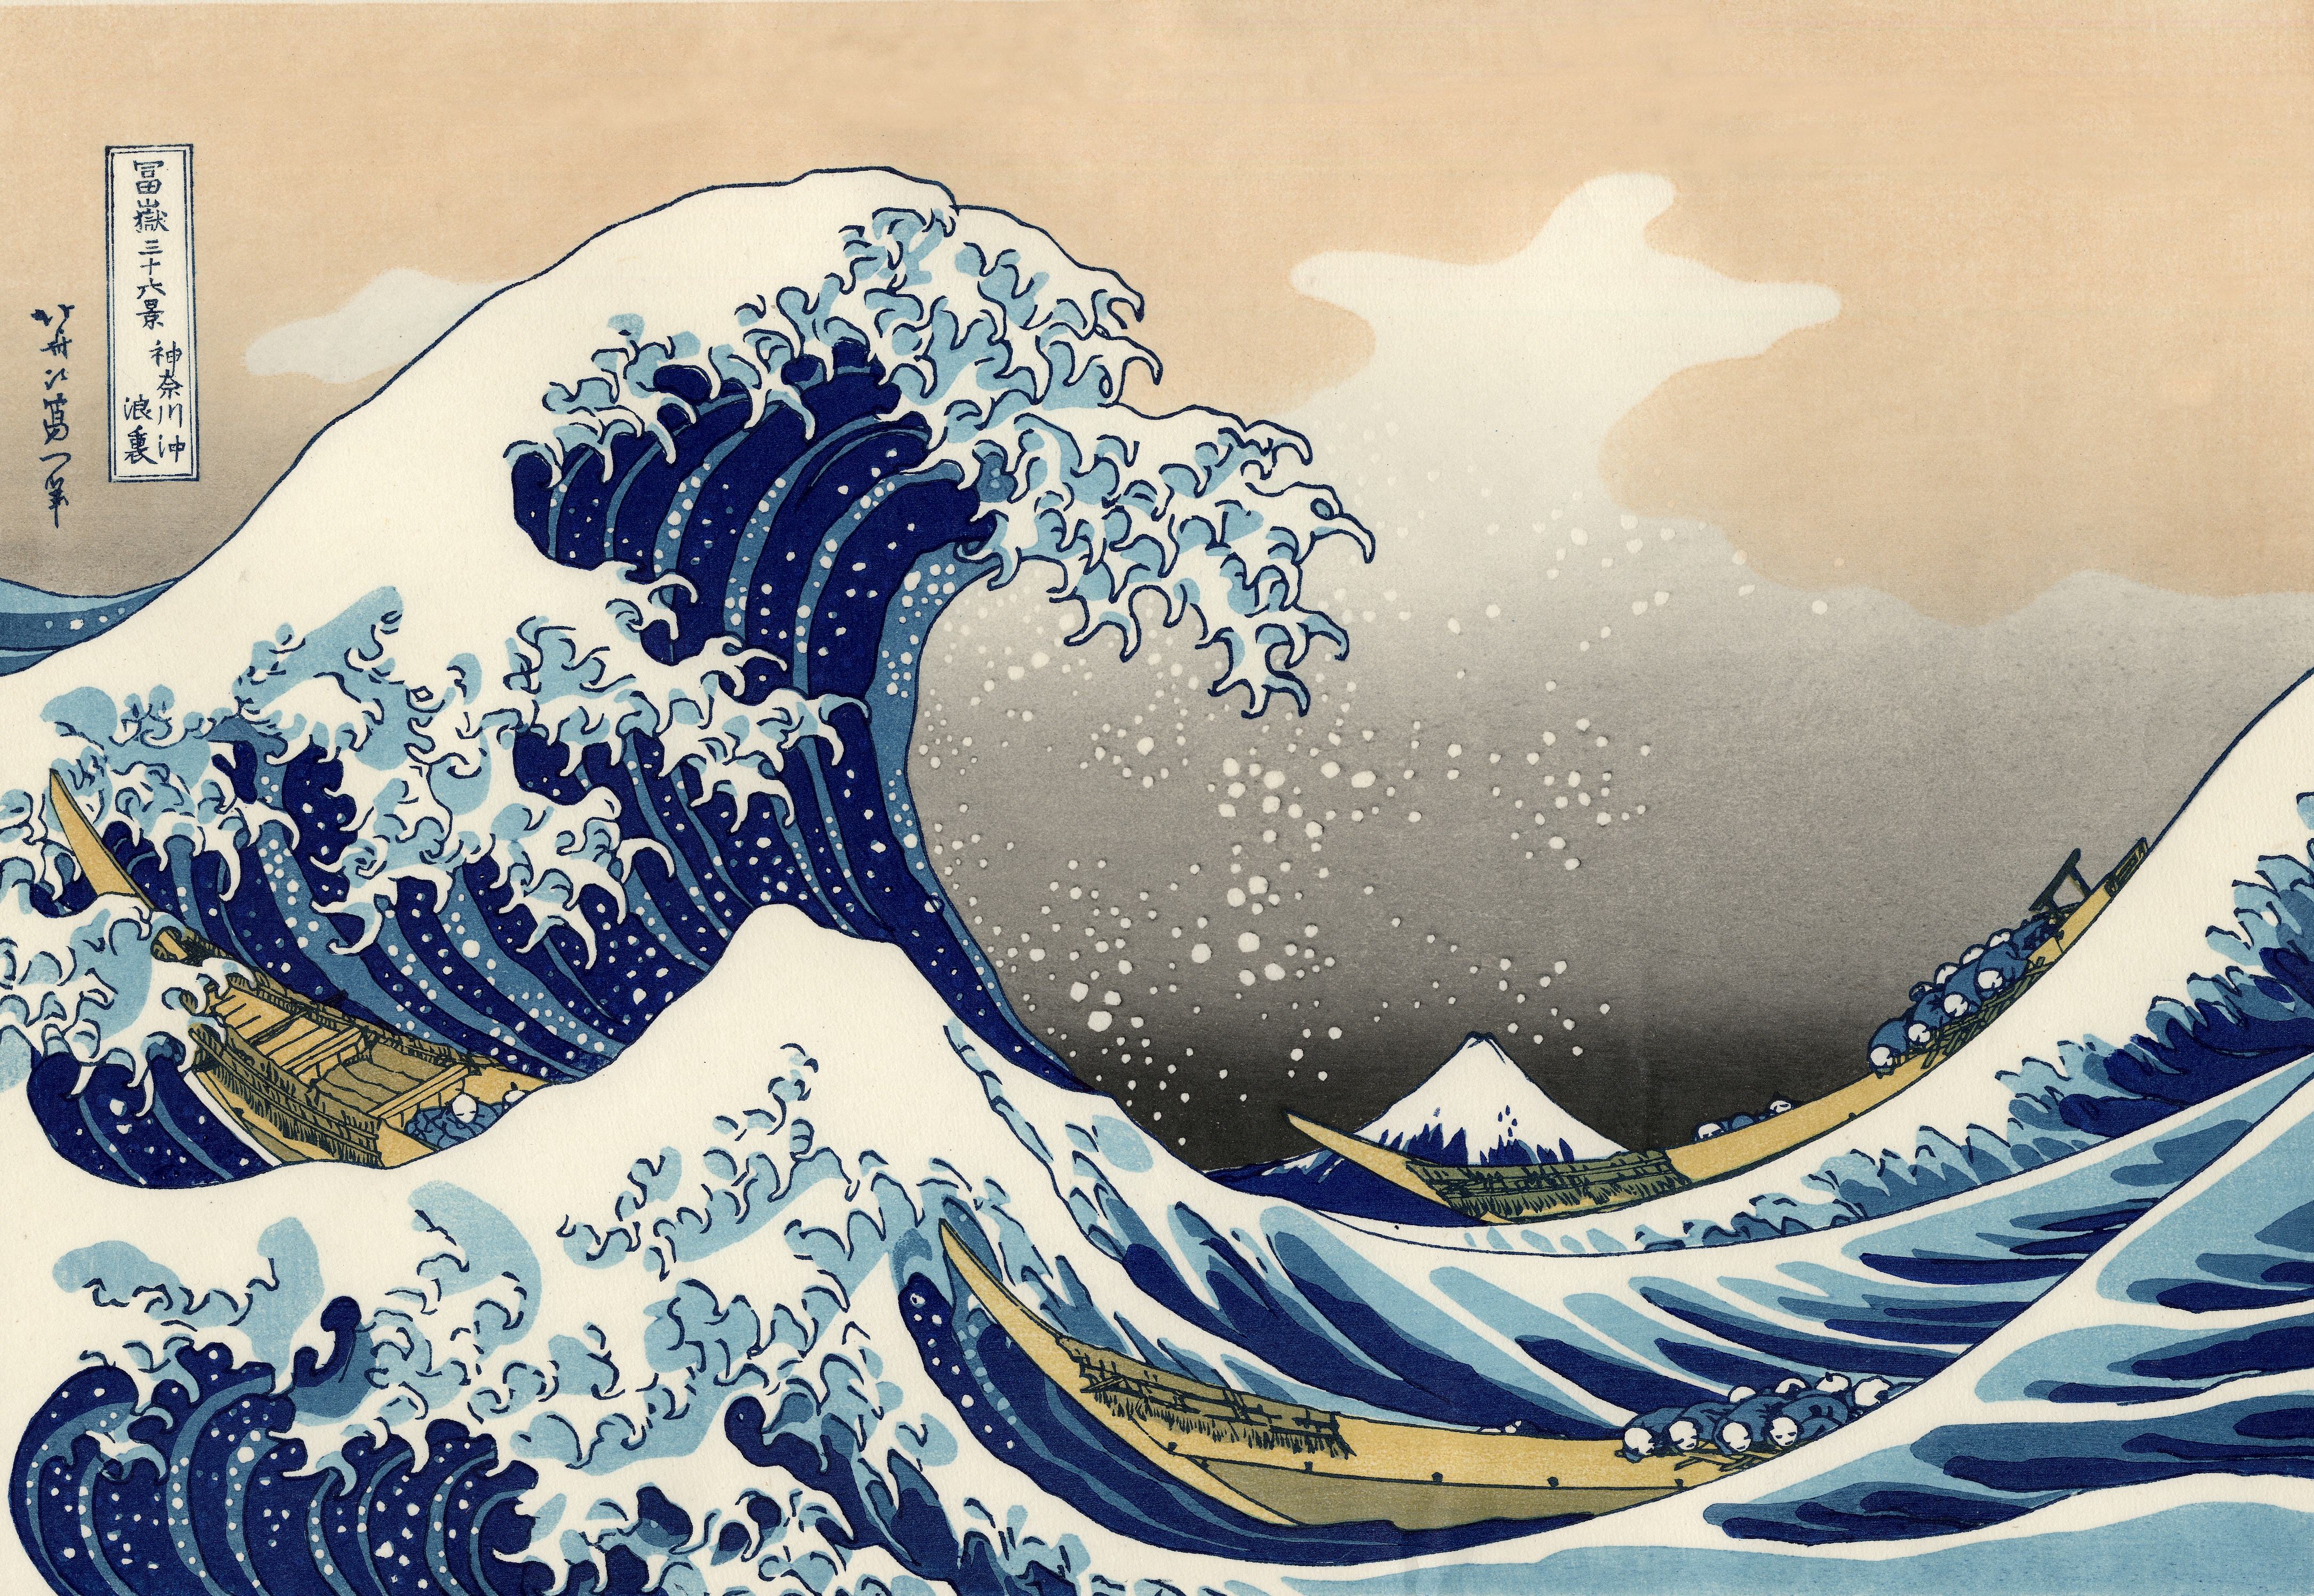 wave, the great wave off kanagawa, artistic wallpapers for tablet